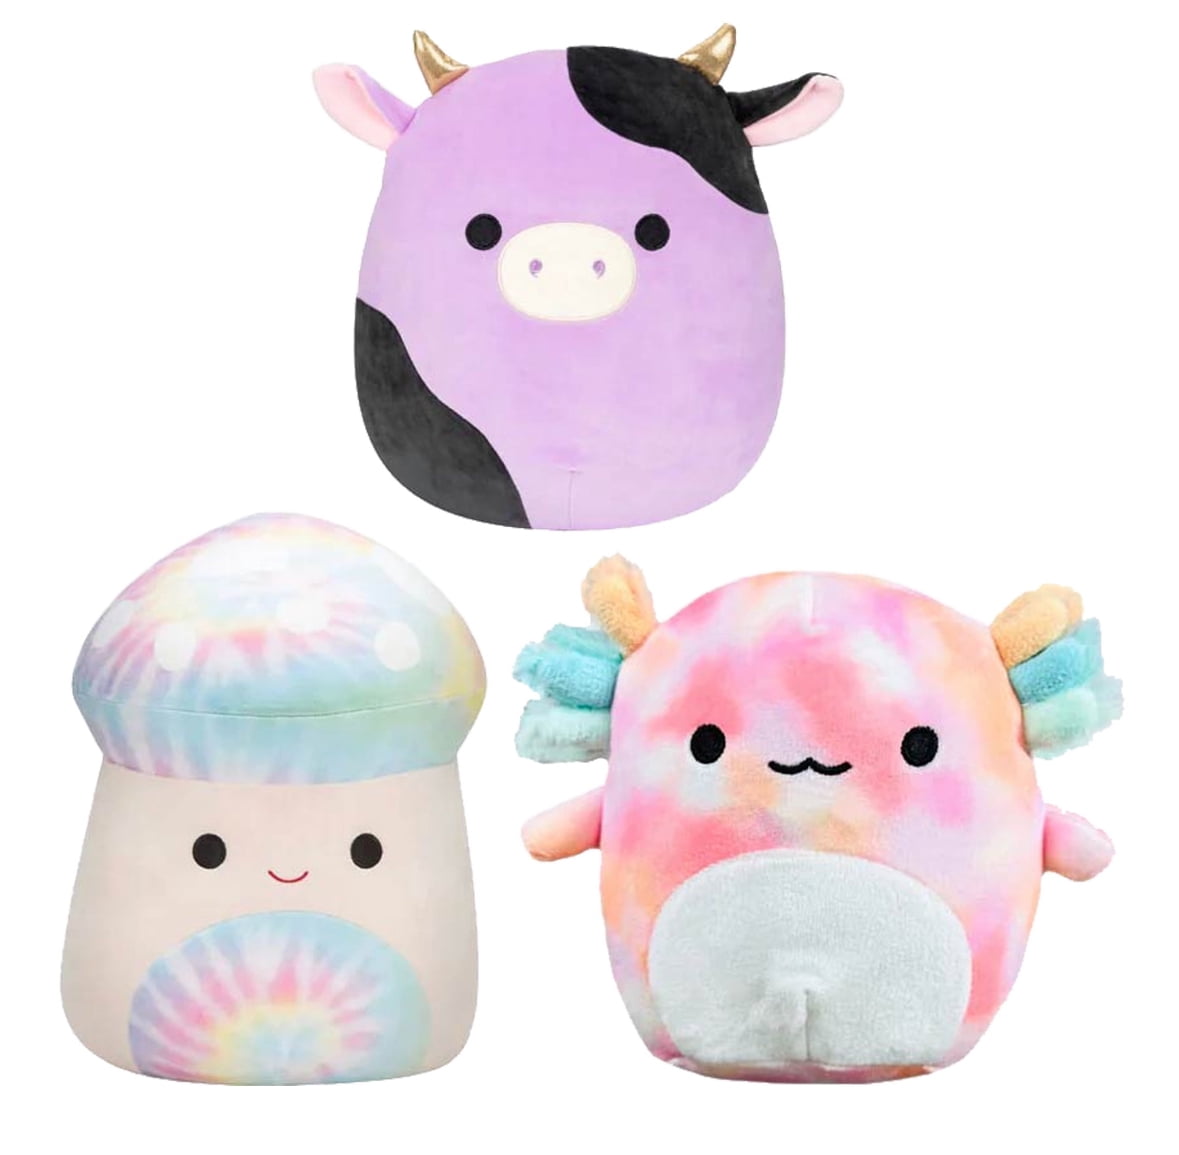 Squishmallow 5 Plush Mystery Box, 5-Pack - Assorted Set of Various Styles  - Official Kellytoy - Cute and Soft Squishy Stuffed Animal Toy